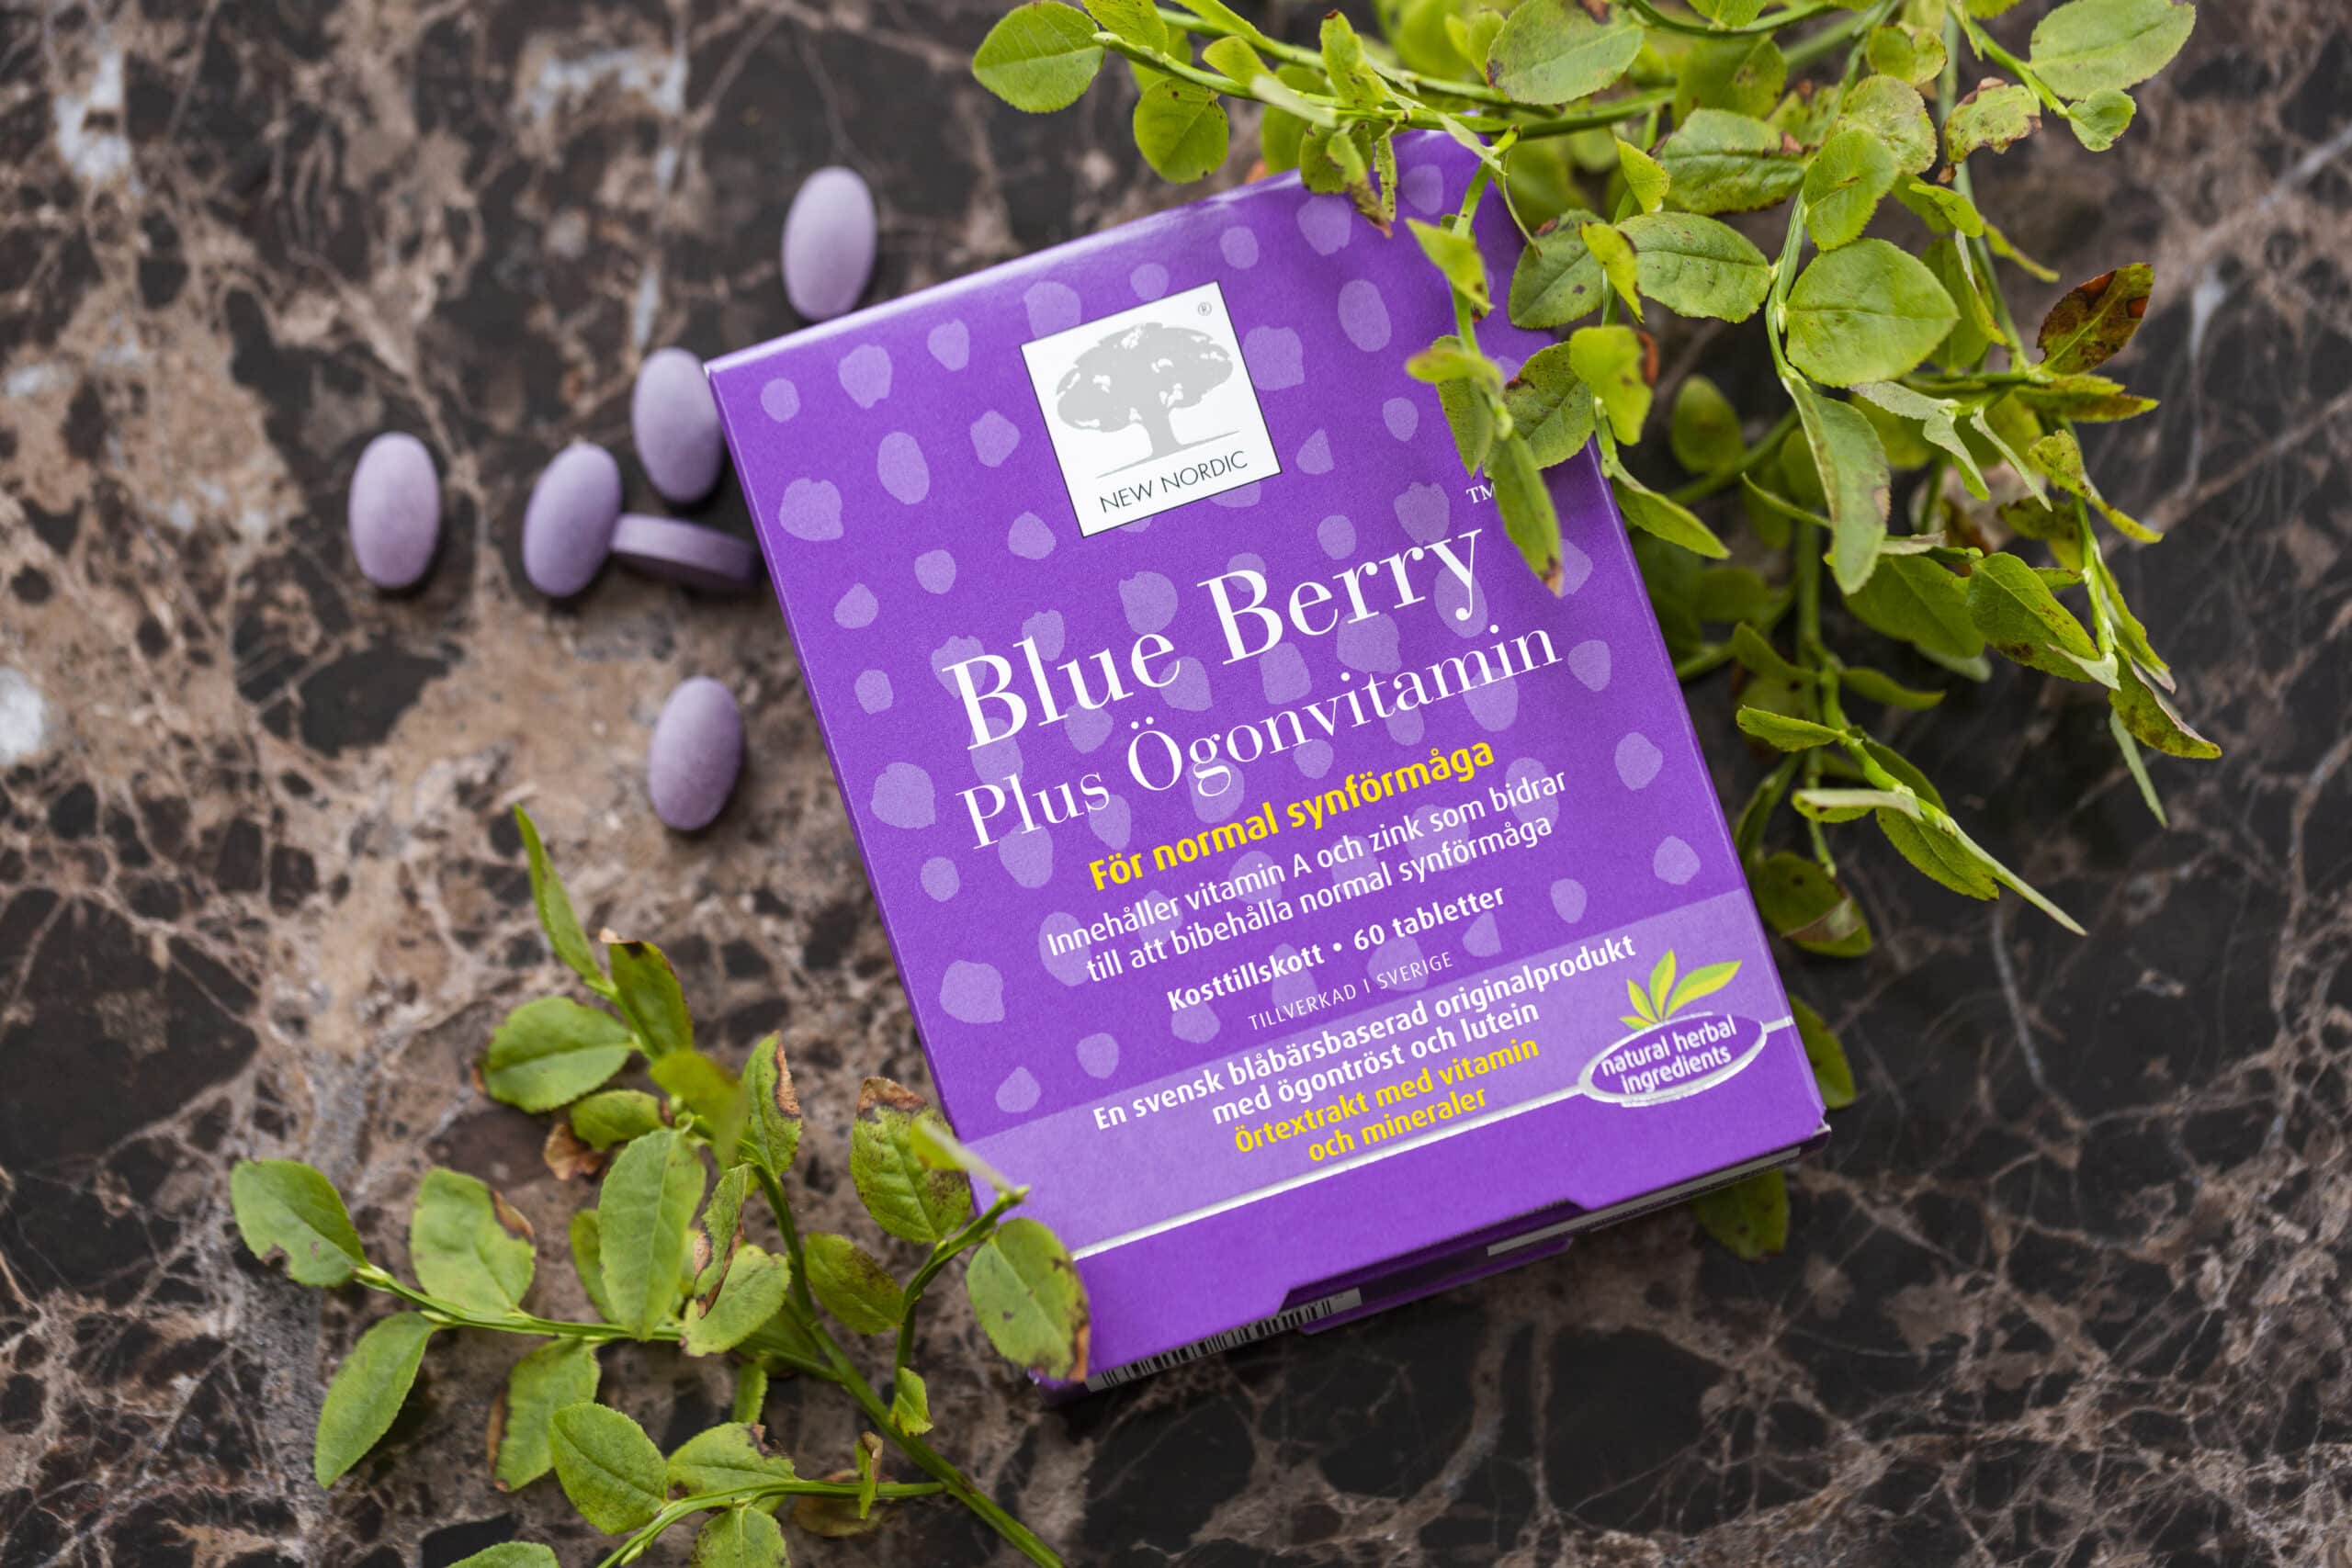 Blue Berry package and tablets surrounded by forest